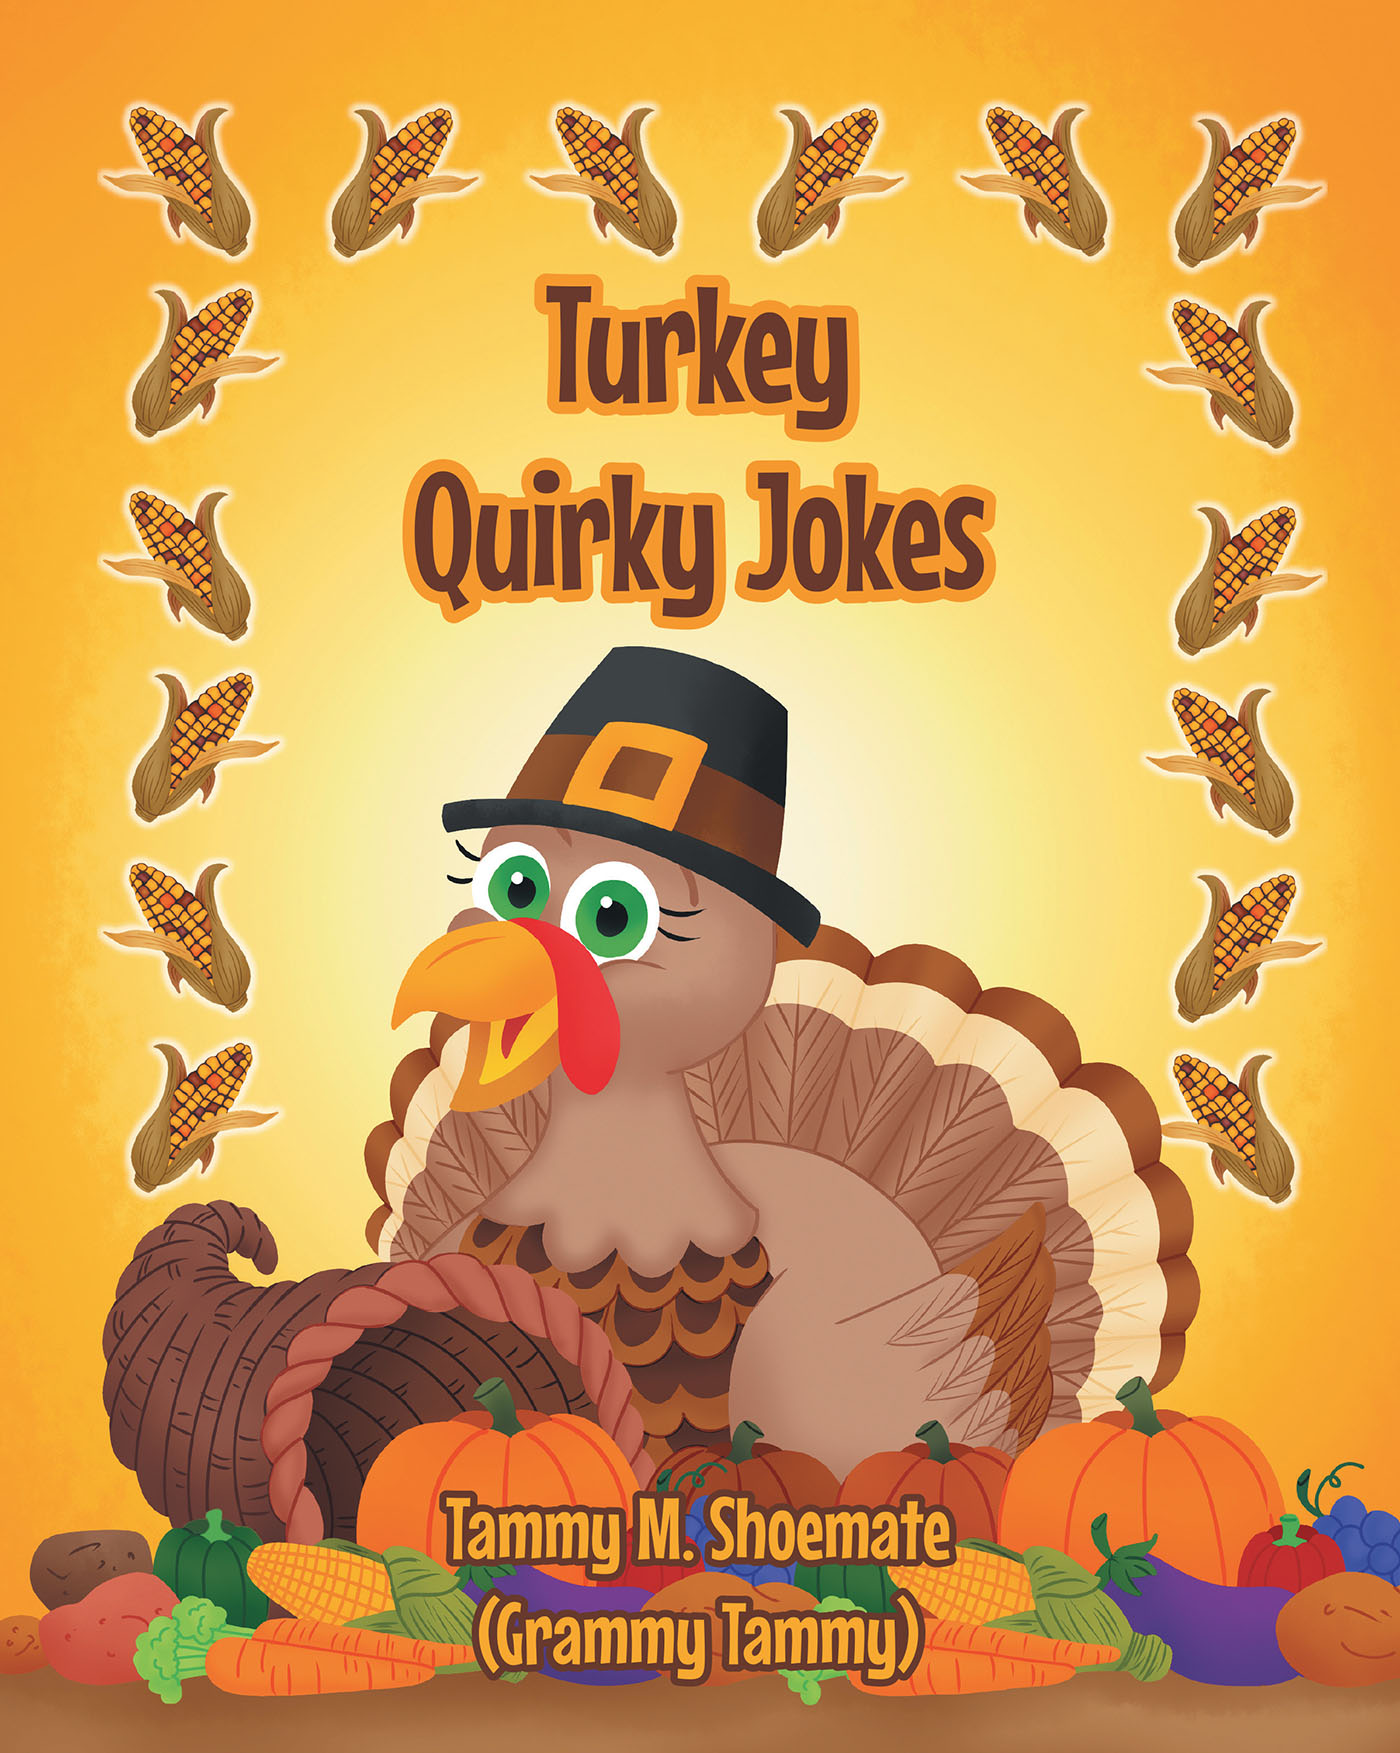 Author Tammy M. Shoemate’s New Book, "Turkey Quirky Jokes," is a Joke Book from a Grandmother to Her Grandchildren